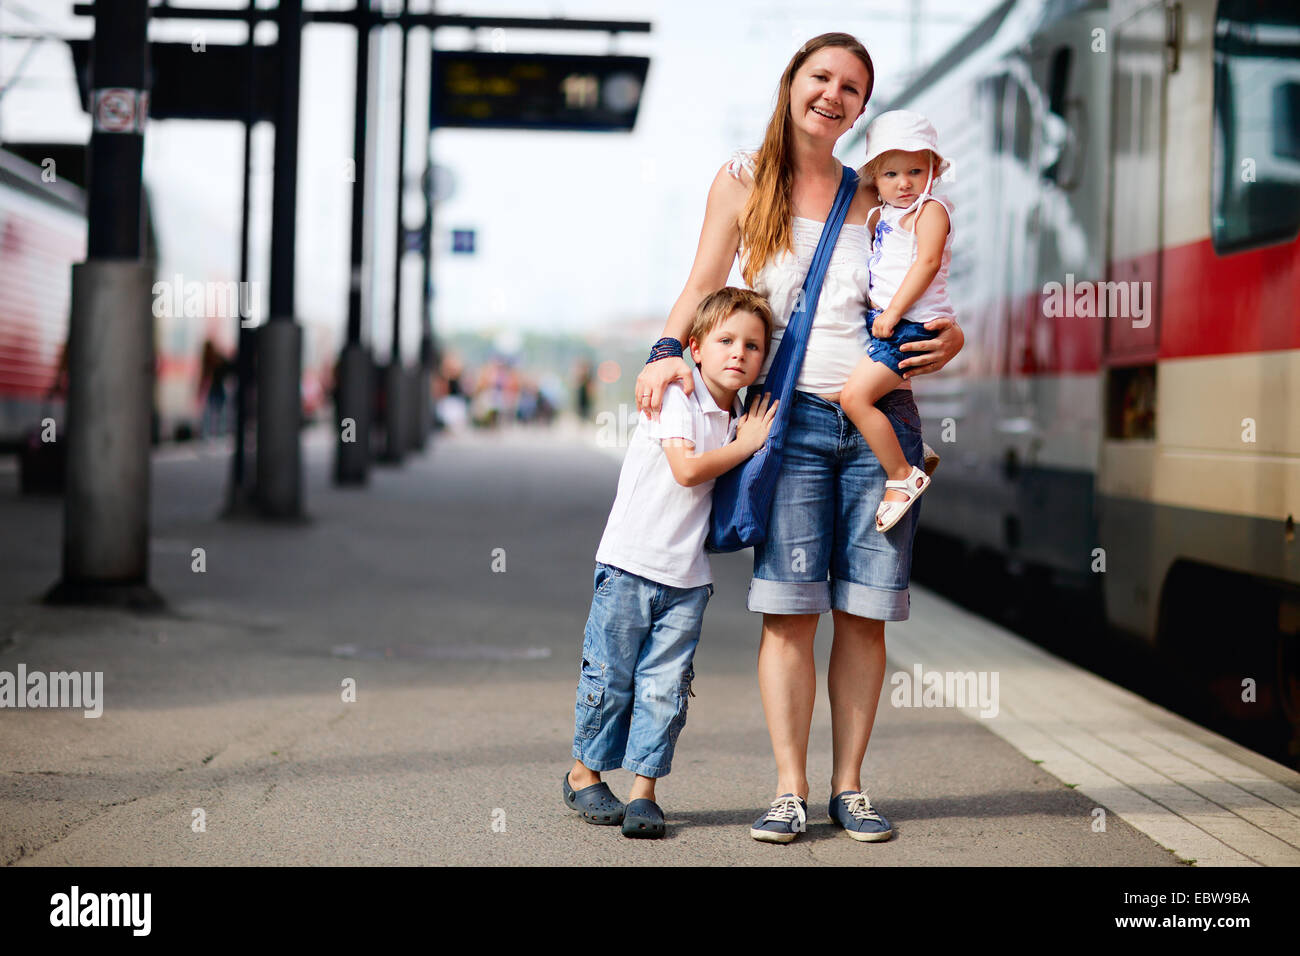 a young mother with her two children waiting for train Stock Photo